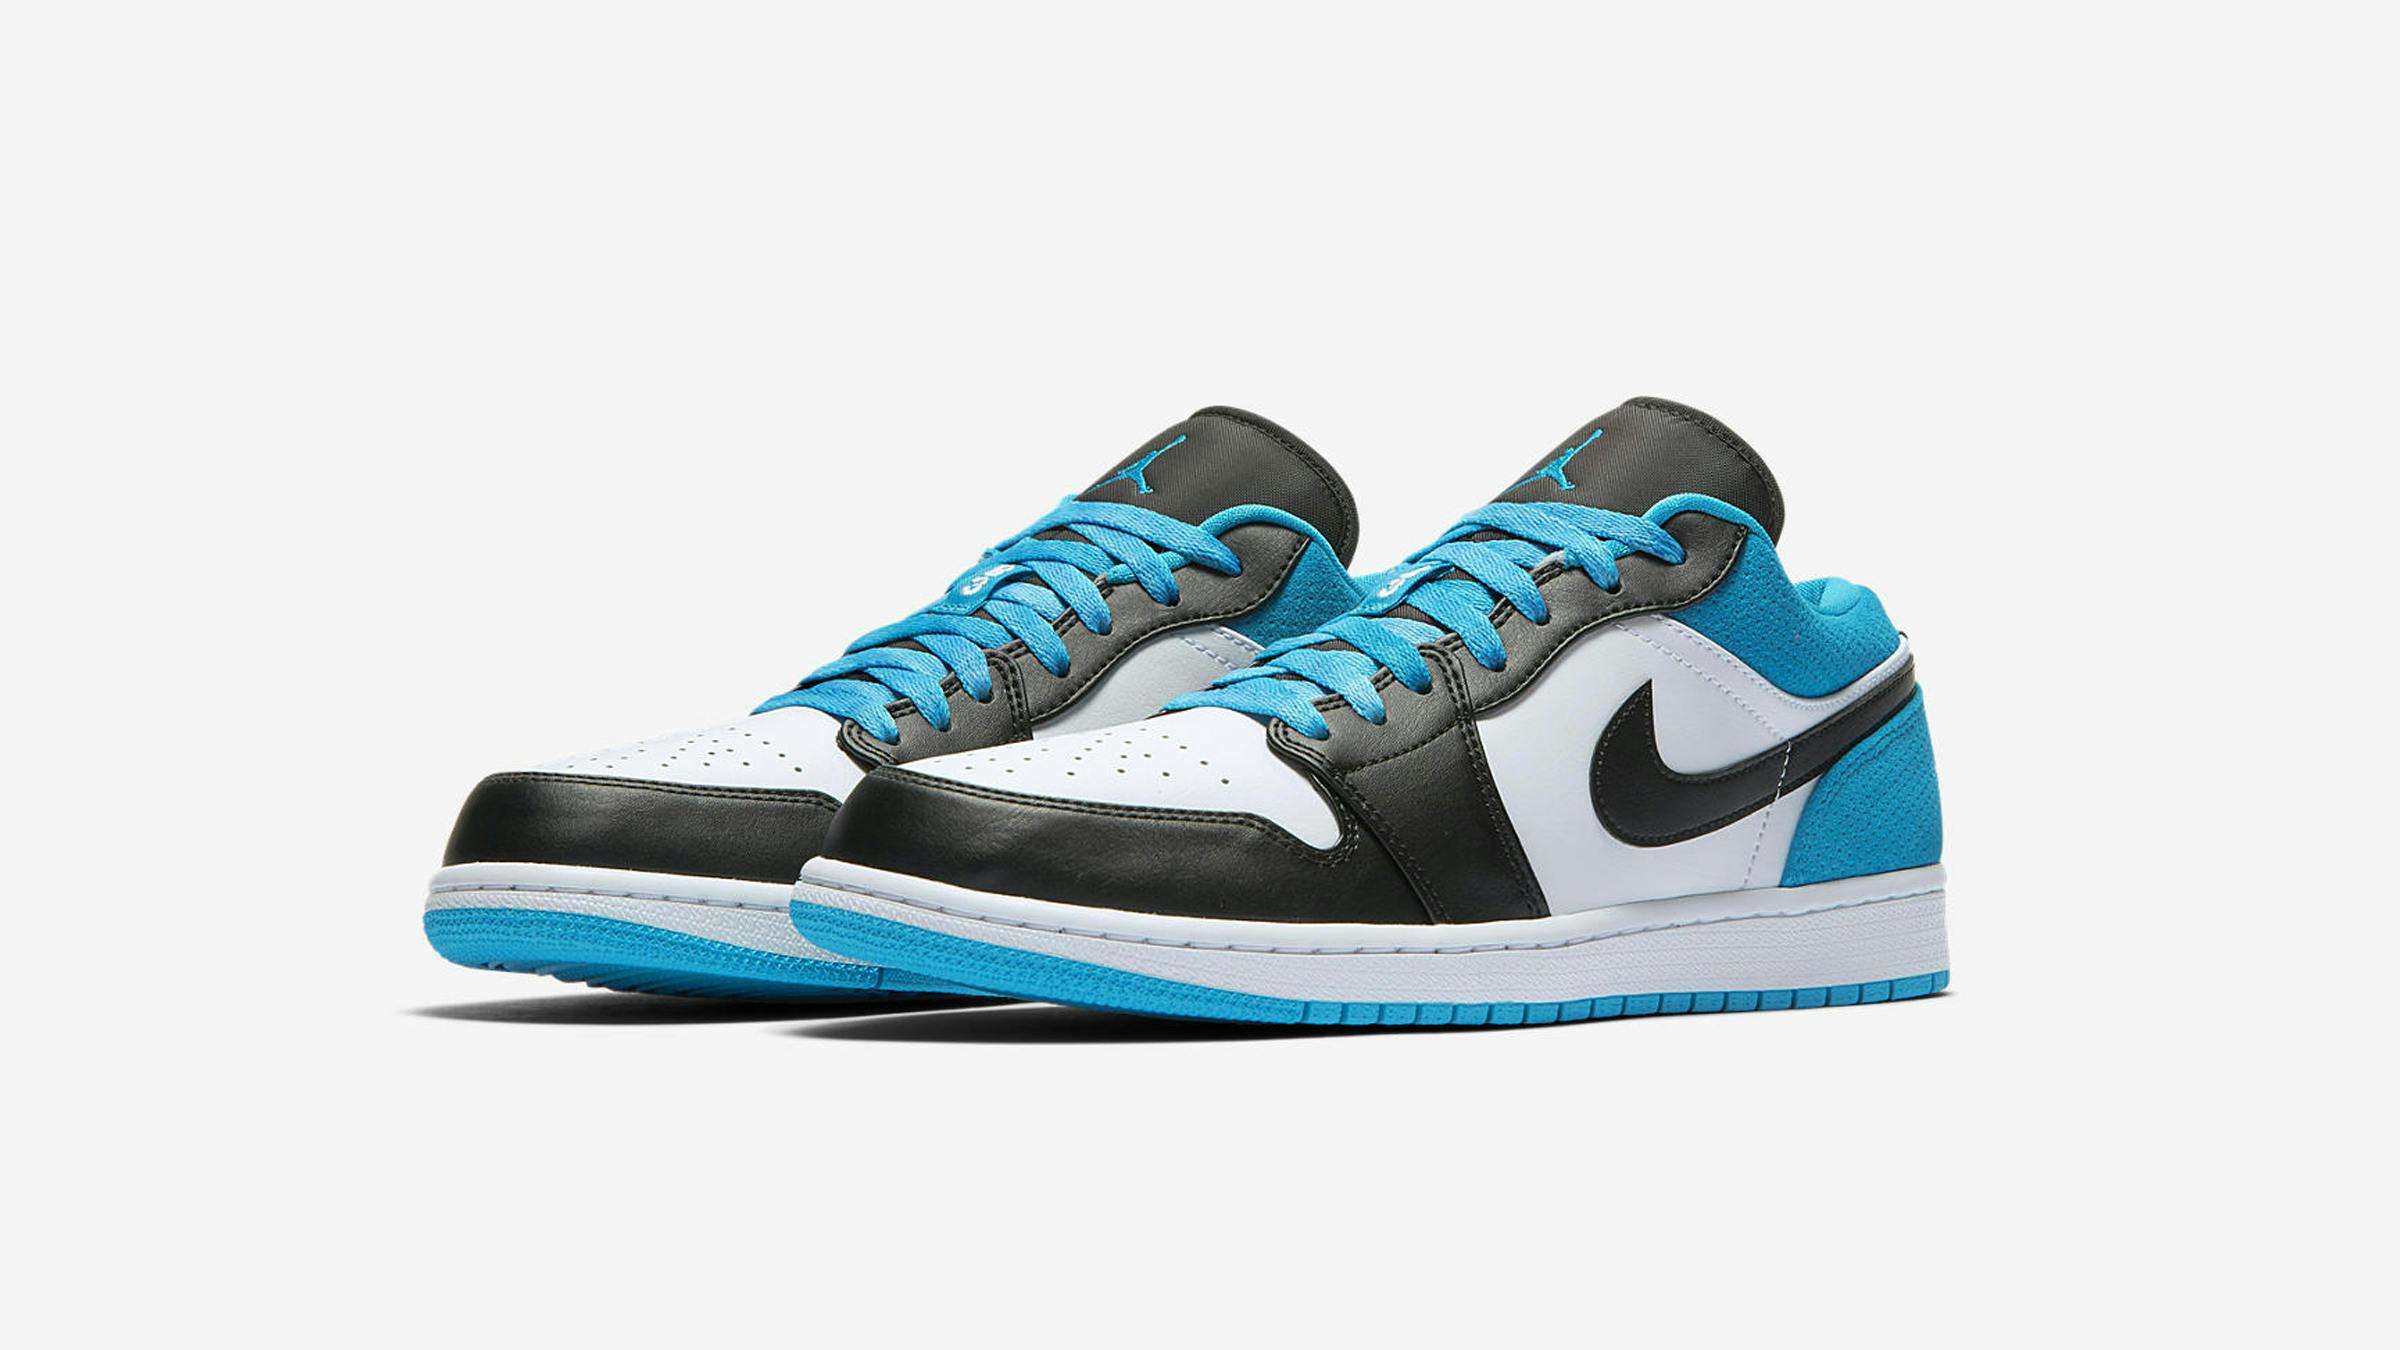 End Features Nike Air Jordan 1 Low Laser Blue Register Now On End Launches